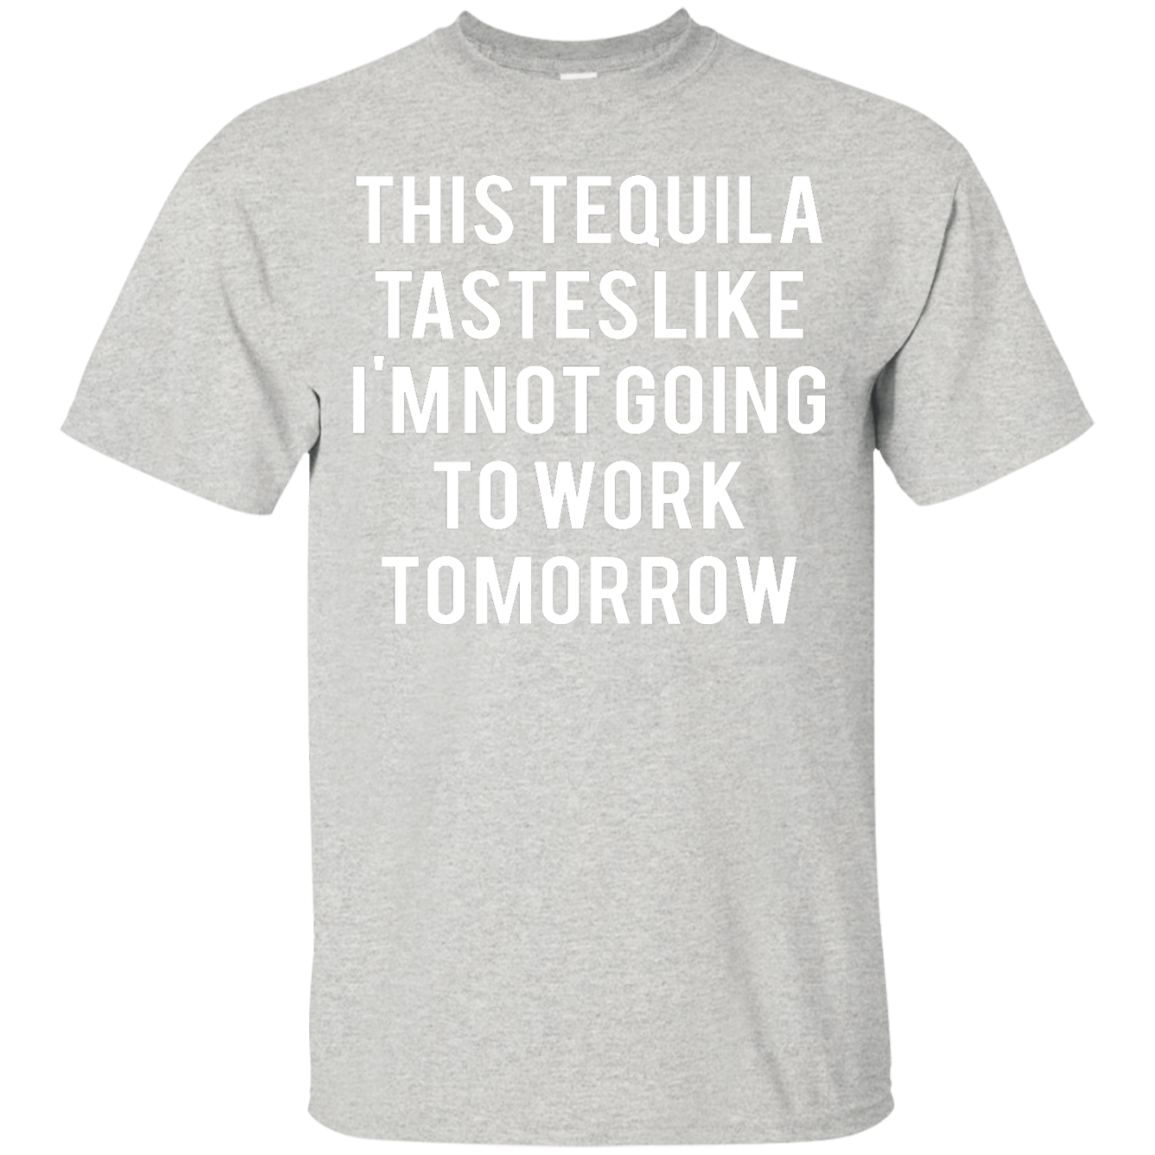 This tequila tastes like I'm not going to work tomorrow shirt, tank